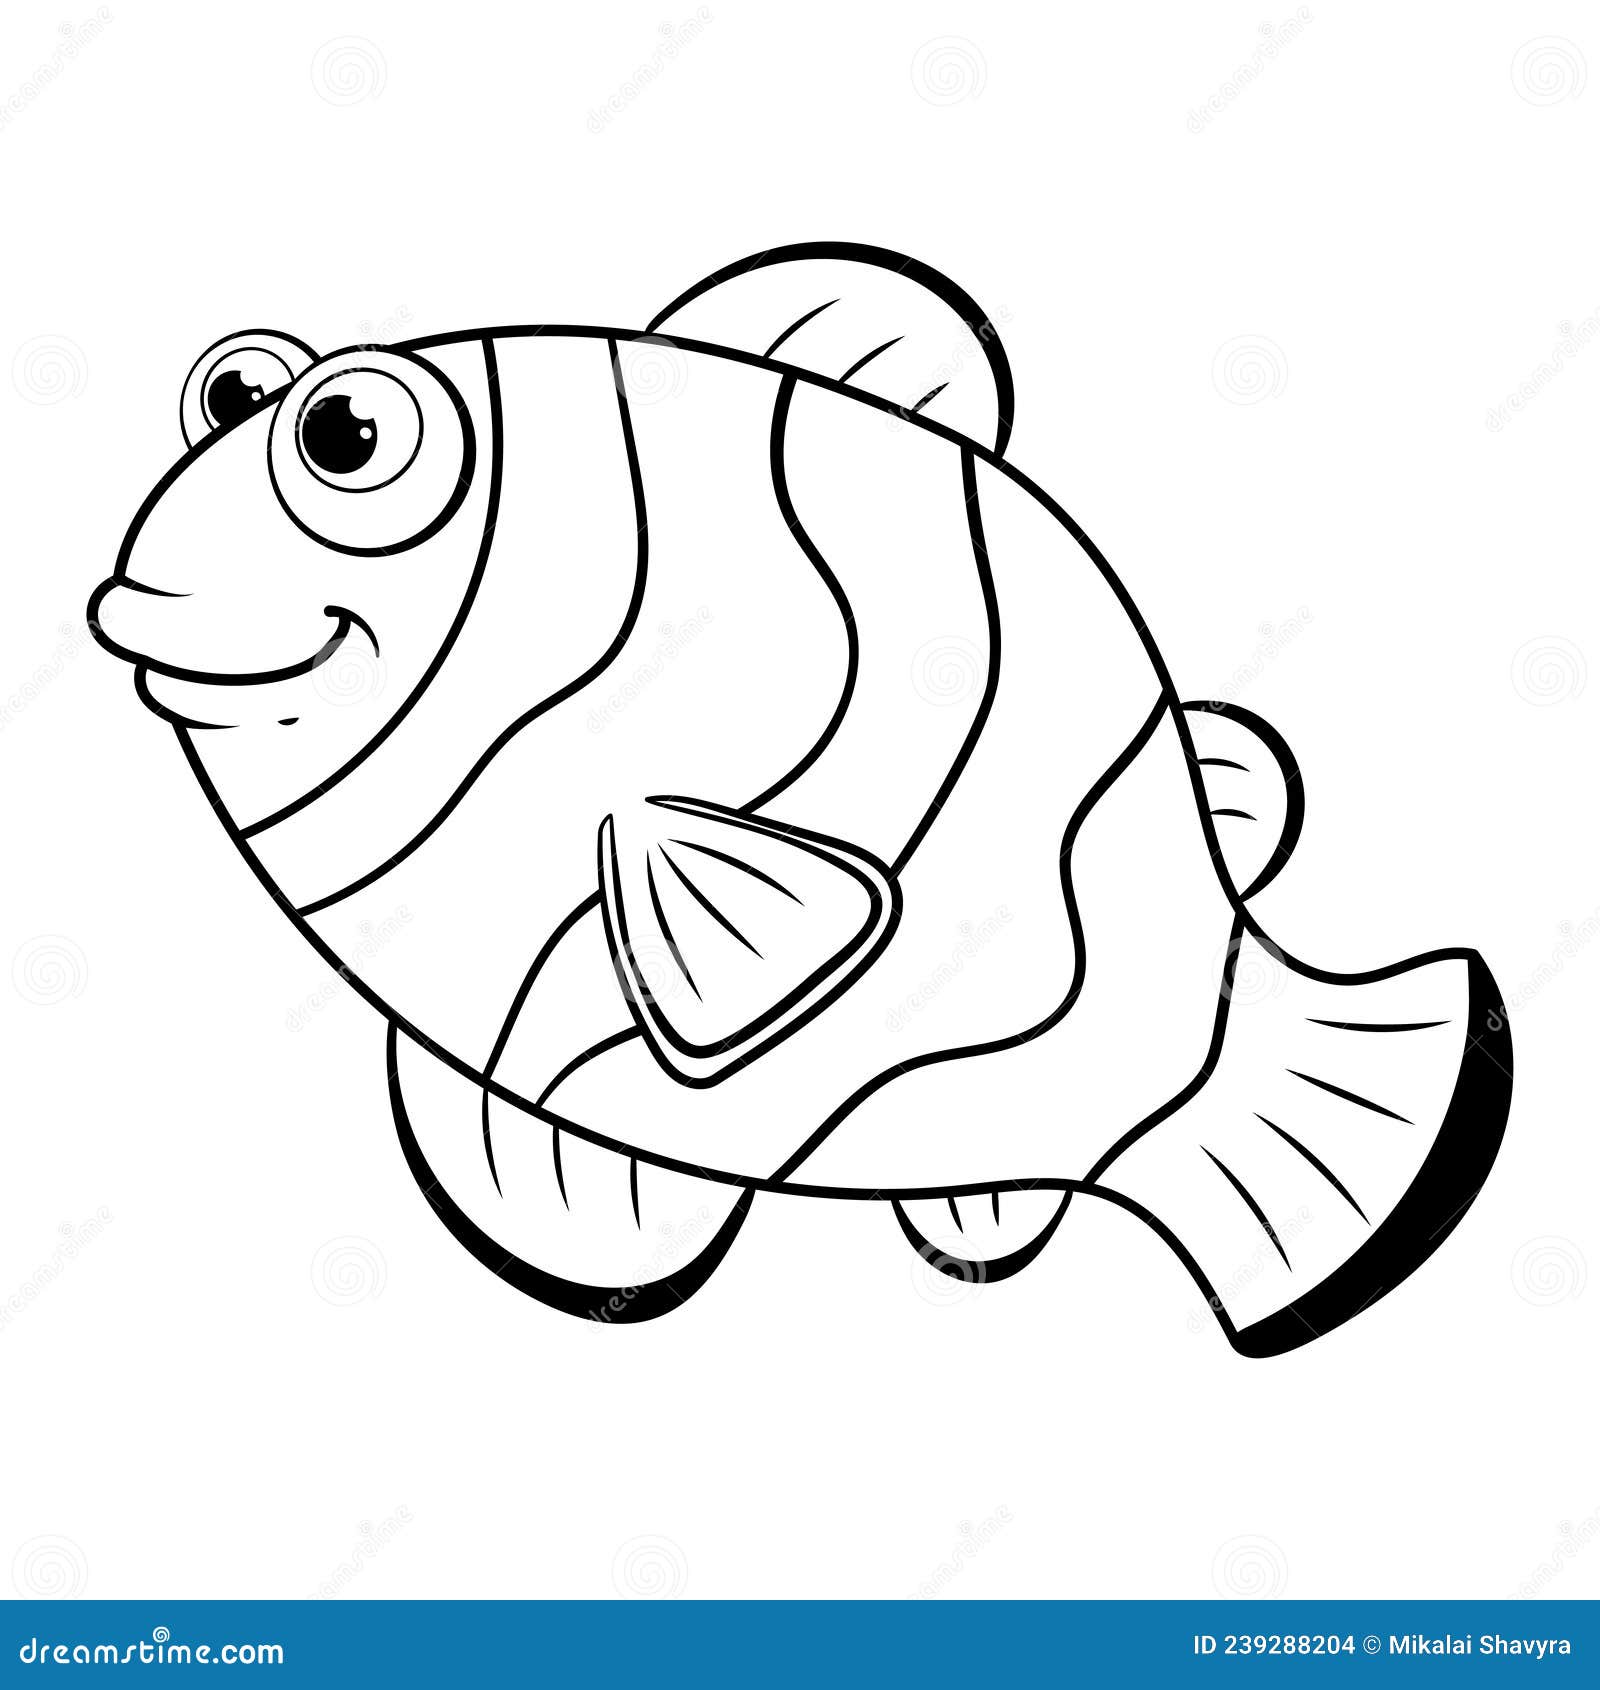 Colorless Cartoon Clown Fish. Coloring Pages. Template Page for Coloring  Book of Funny Sea Fish for Kids. Zebra Fish Stock Vector - Illustration of  activity, cute: 239288204